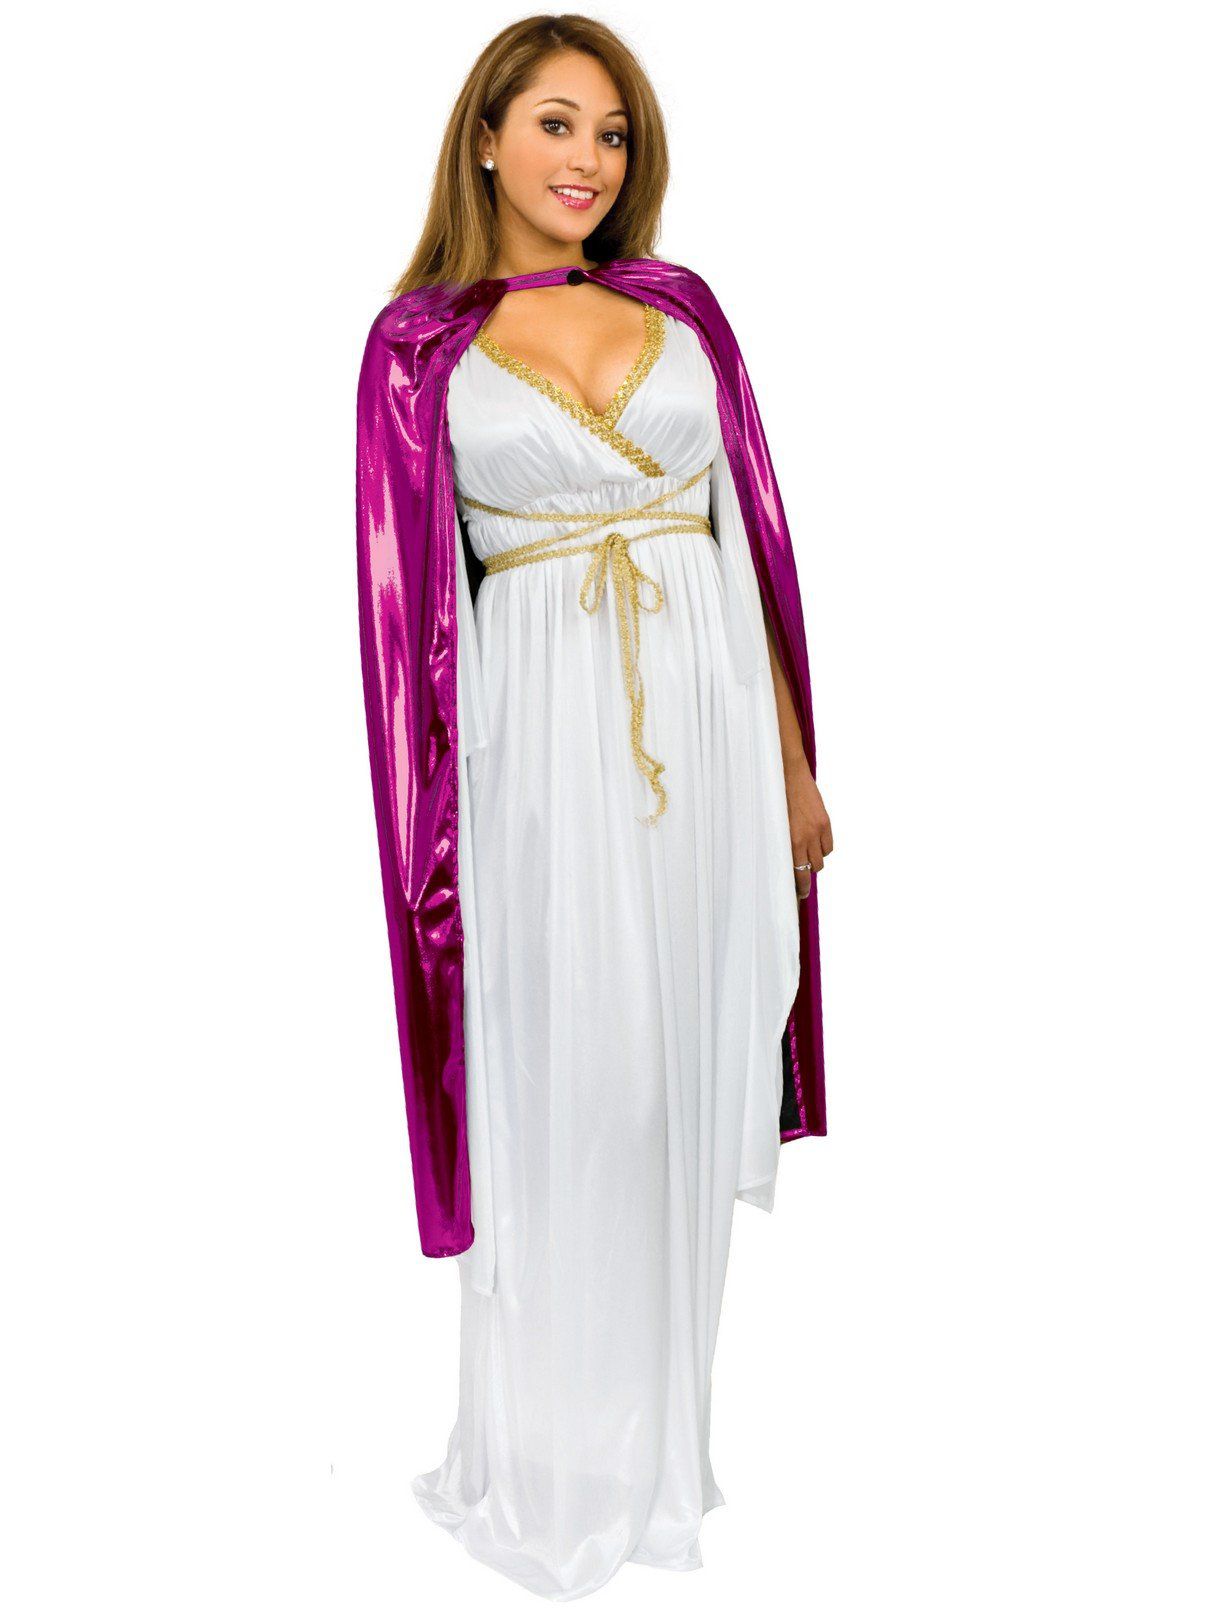 Royal Cape Adult Costume - image 1 of 1